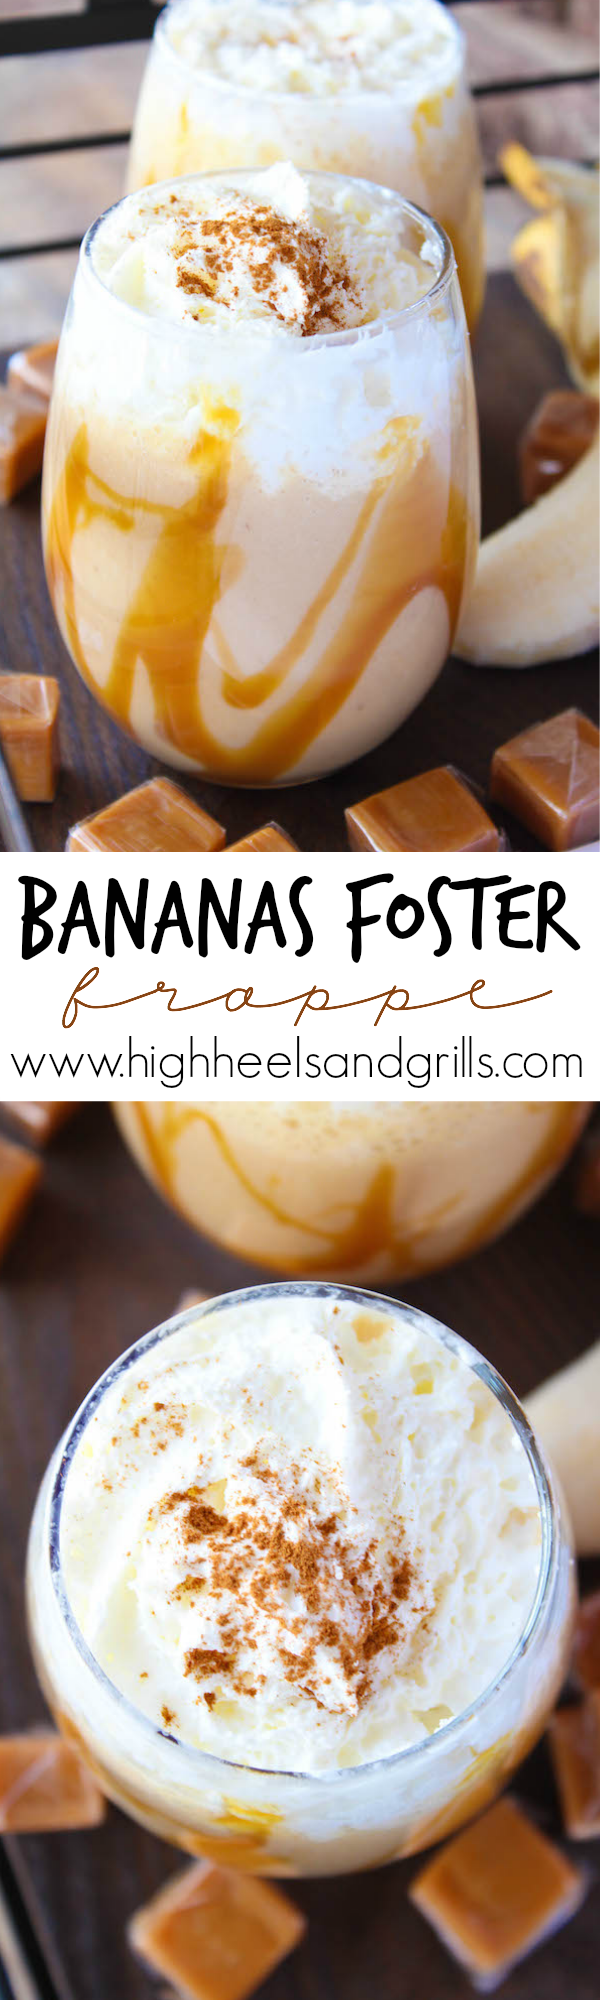 Bananas Foster Frappe - Such a fun and sweet drinkable dessert!